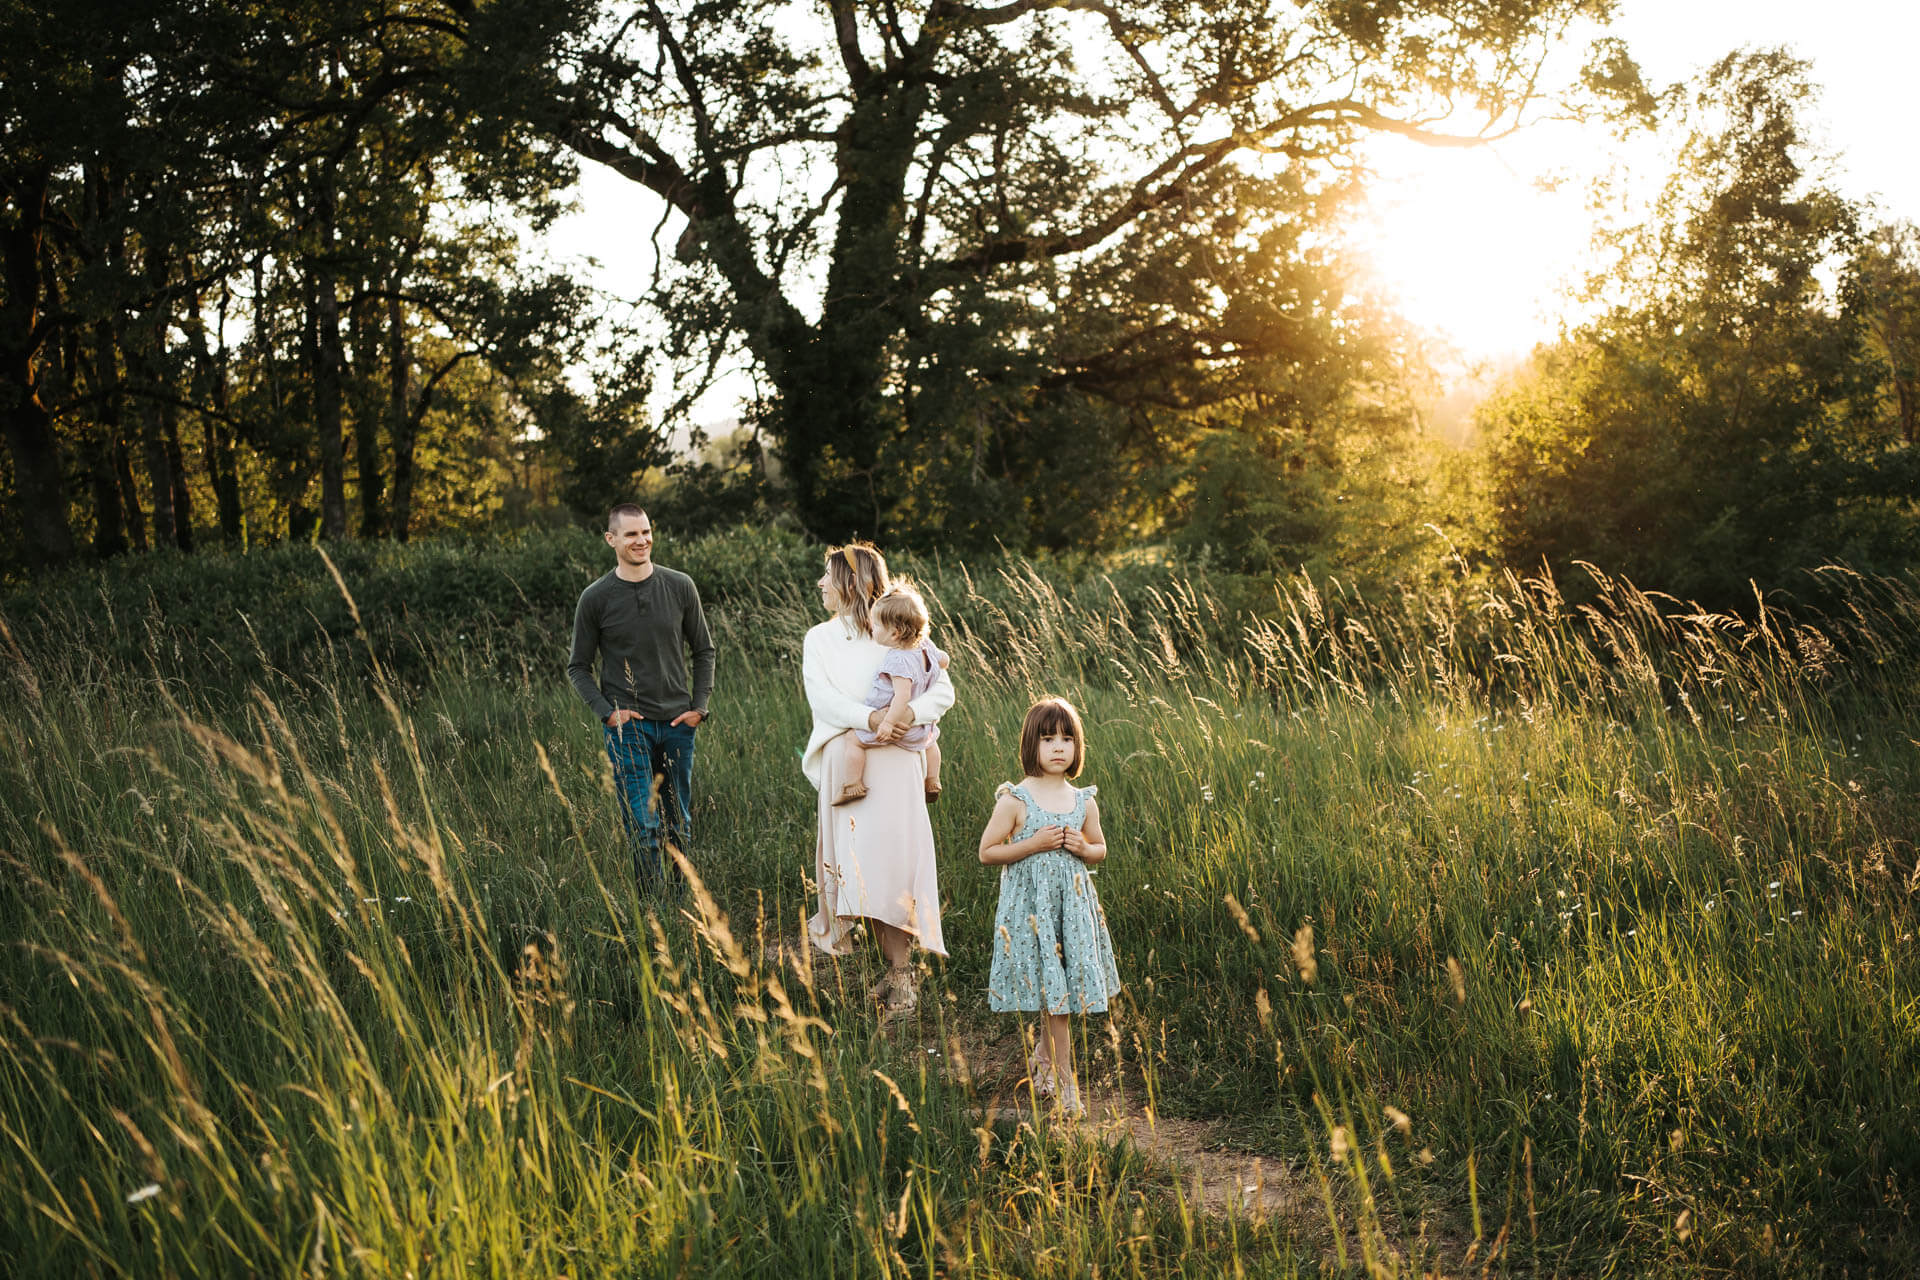 Family of four walking in a flower field in golden light while the sun is setting